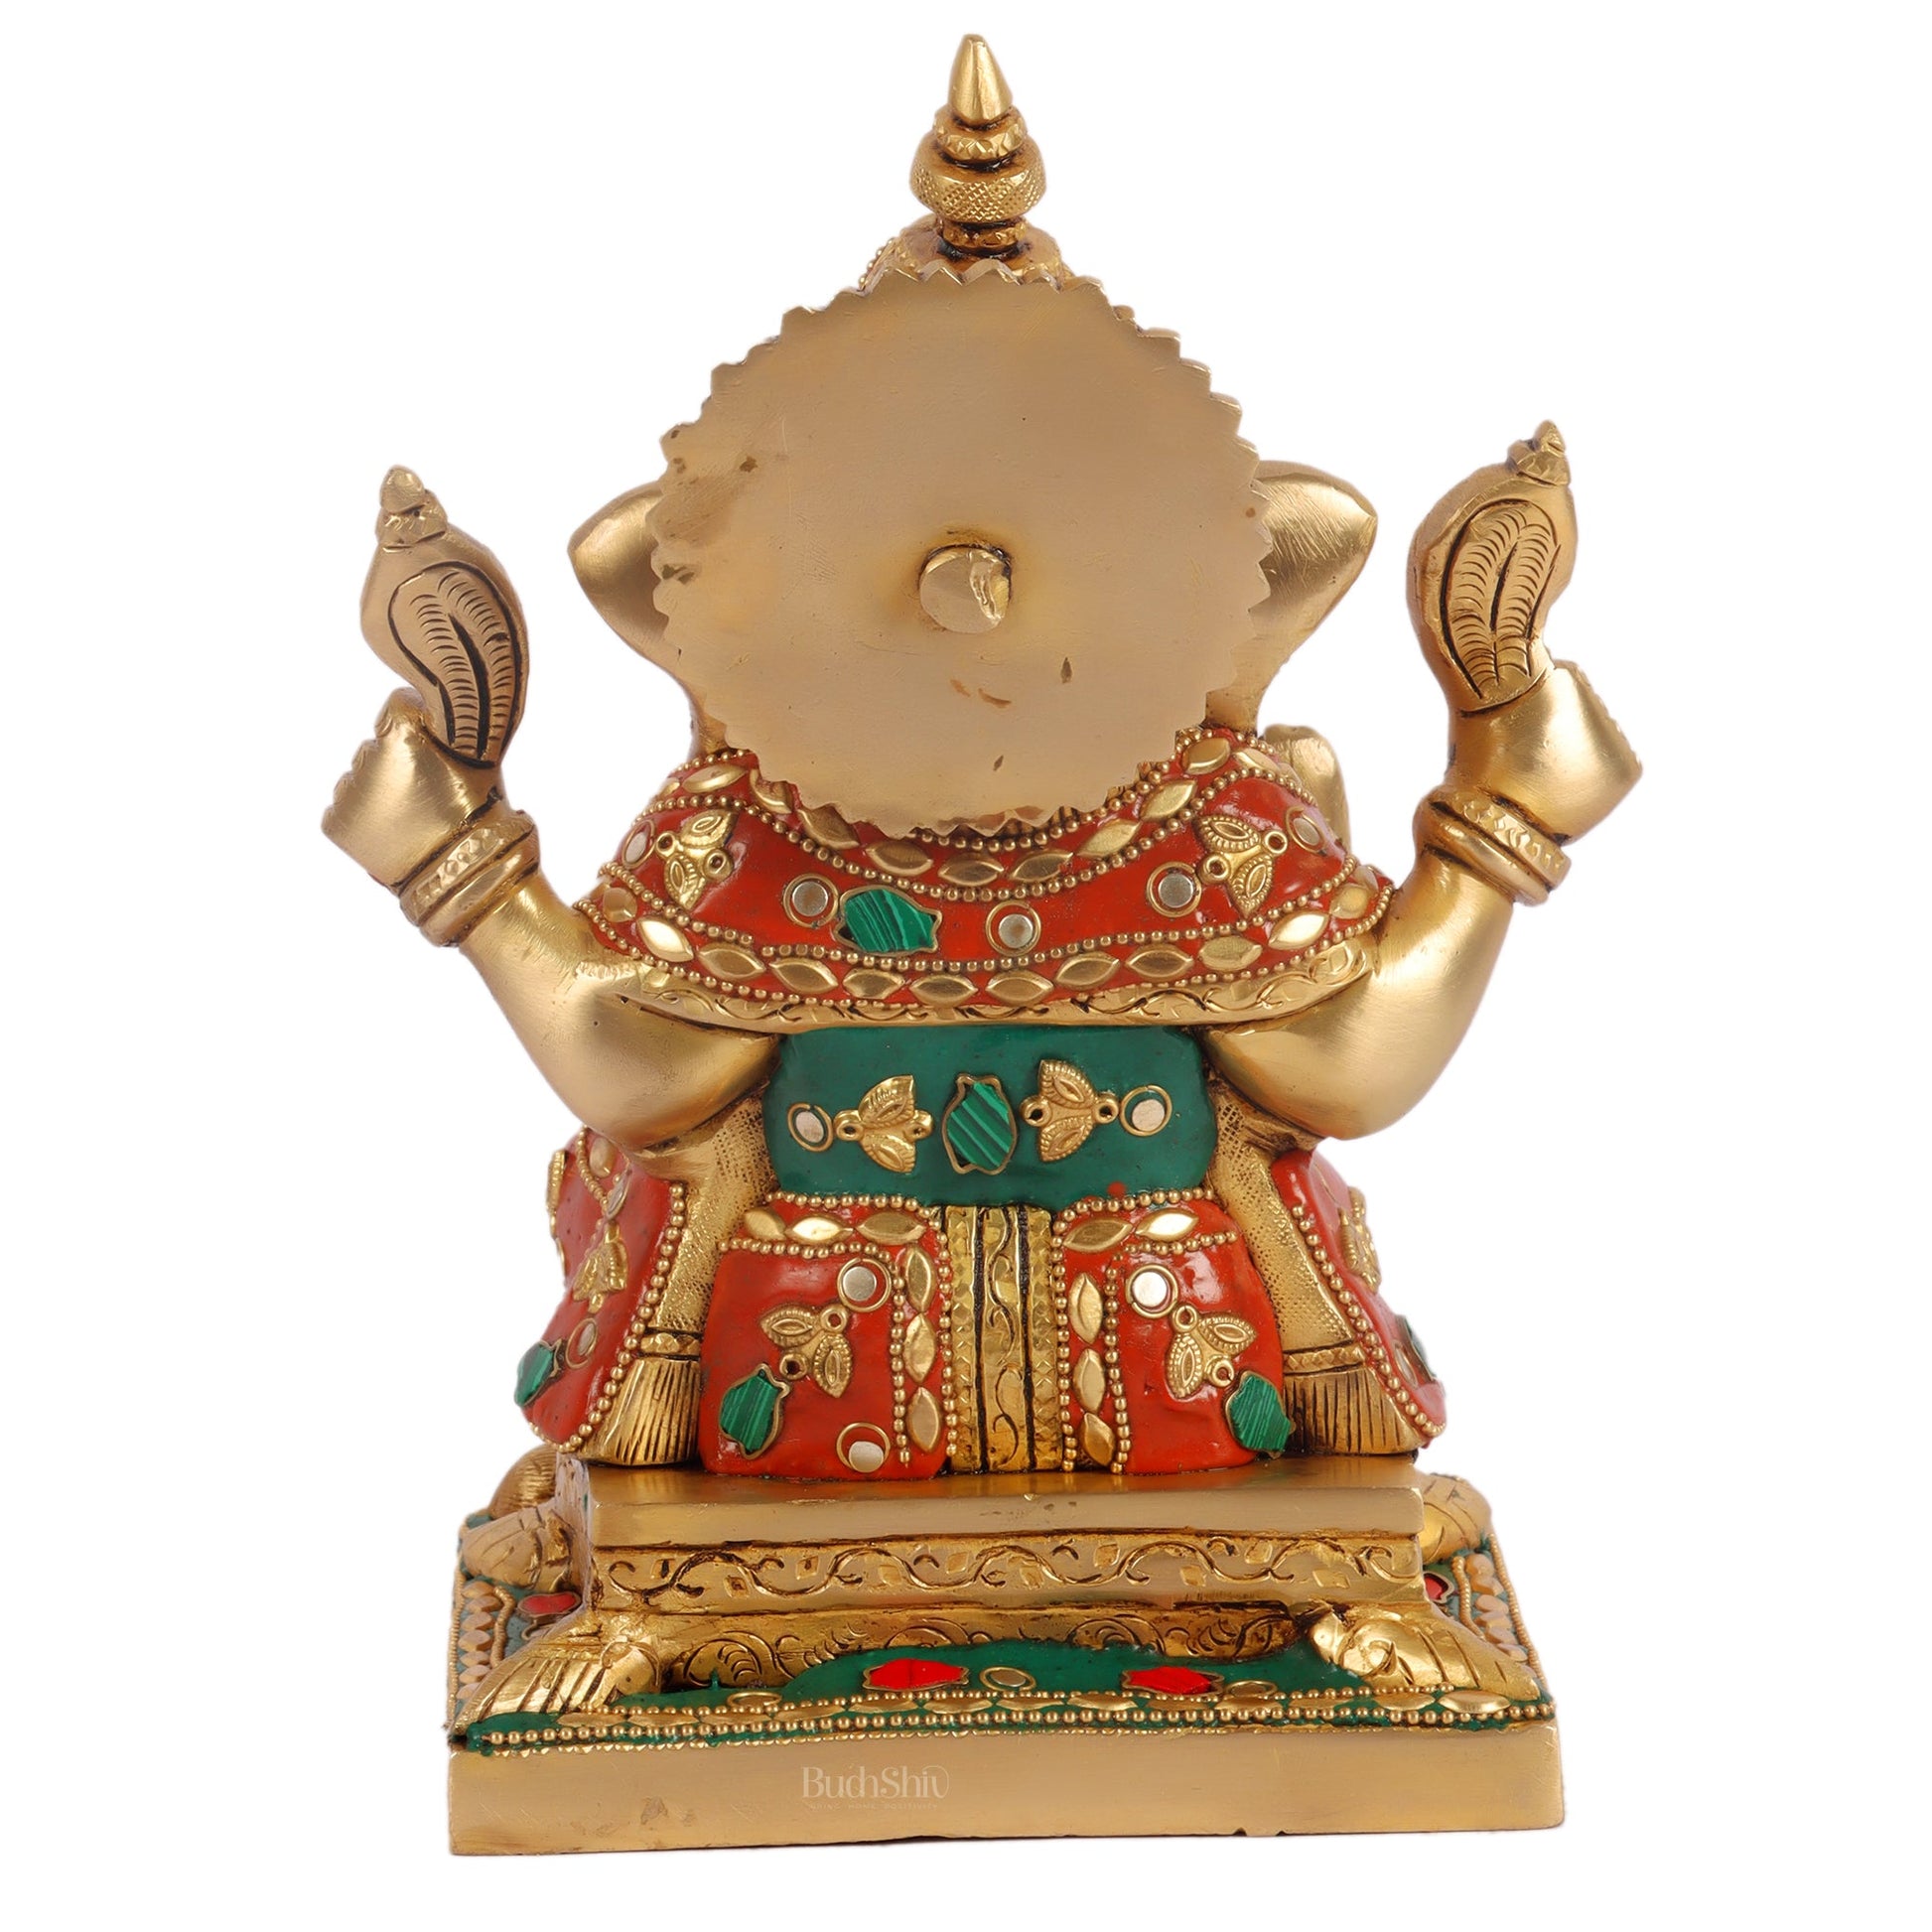 Ganesha superfine Brass statue fully engraved with mouse 8 inch with stonework - Budhshiv.com